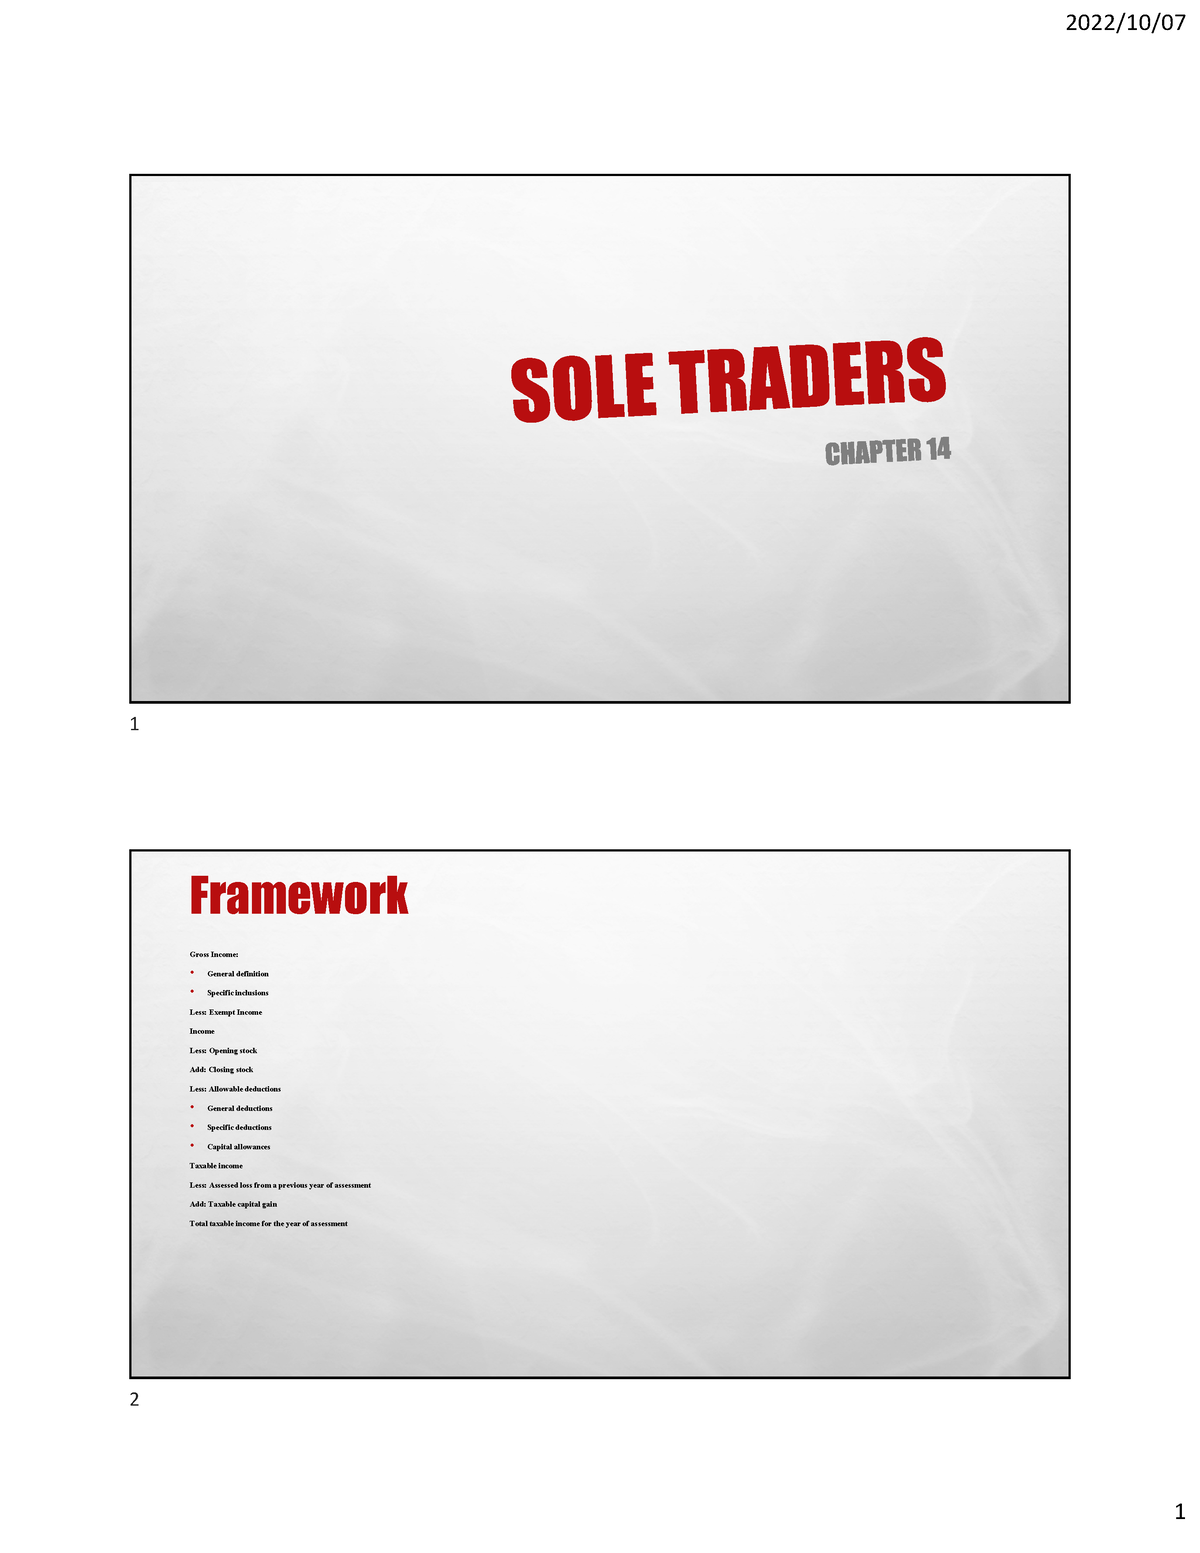 Sole Traders 2022 - notes - Framework Gross Income: ï General ...